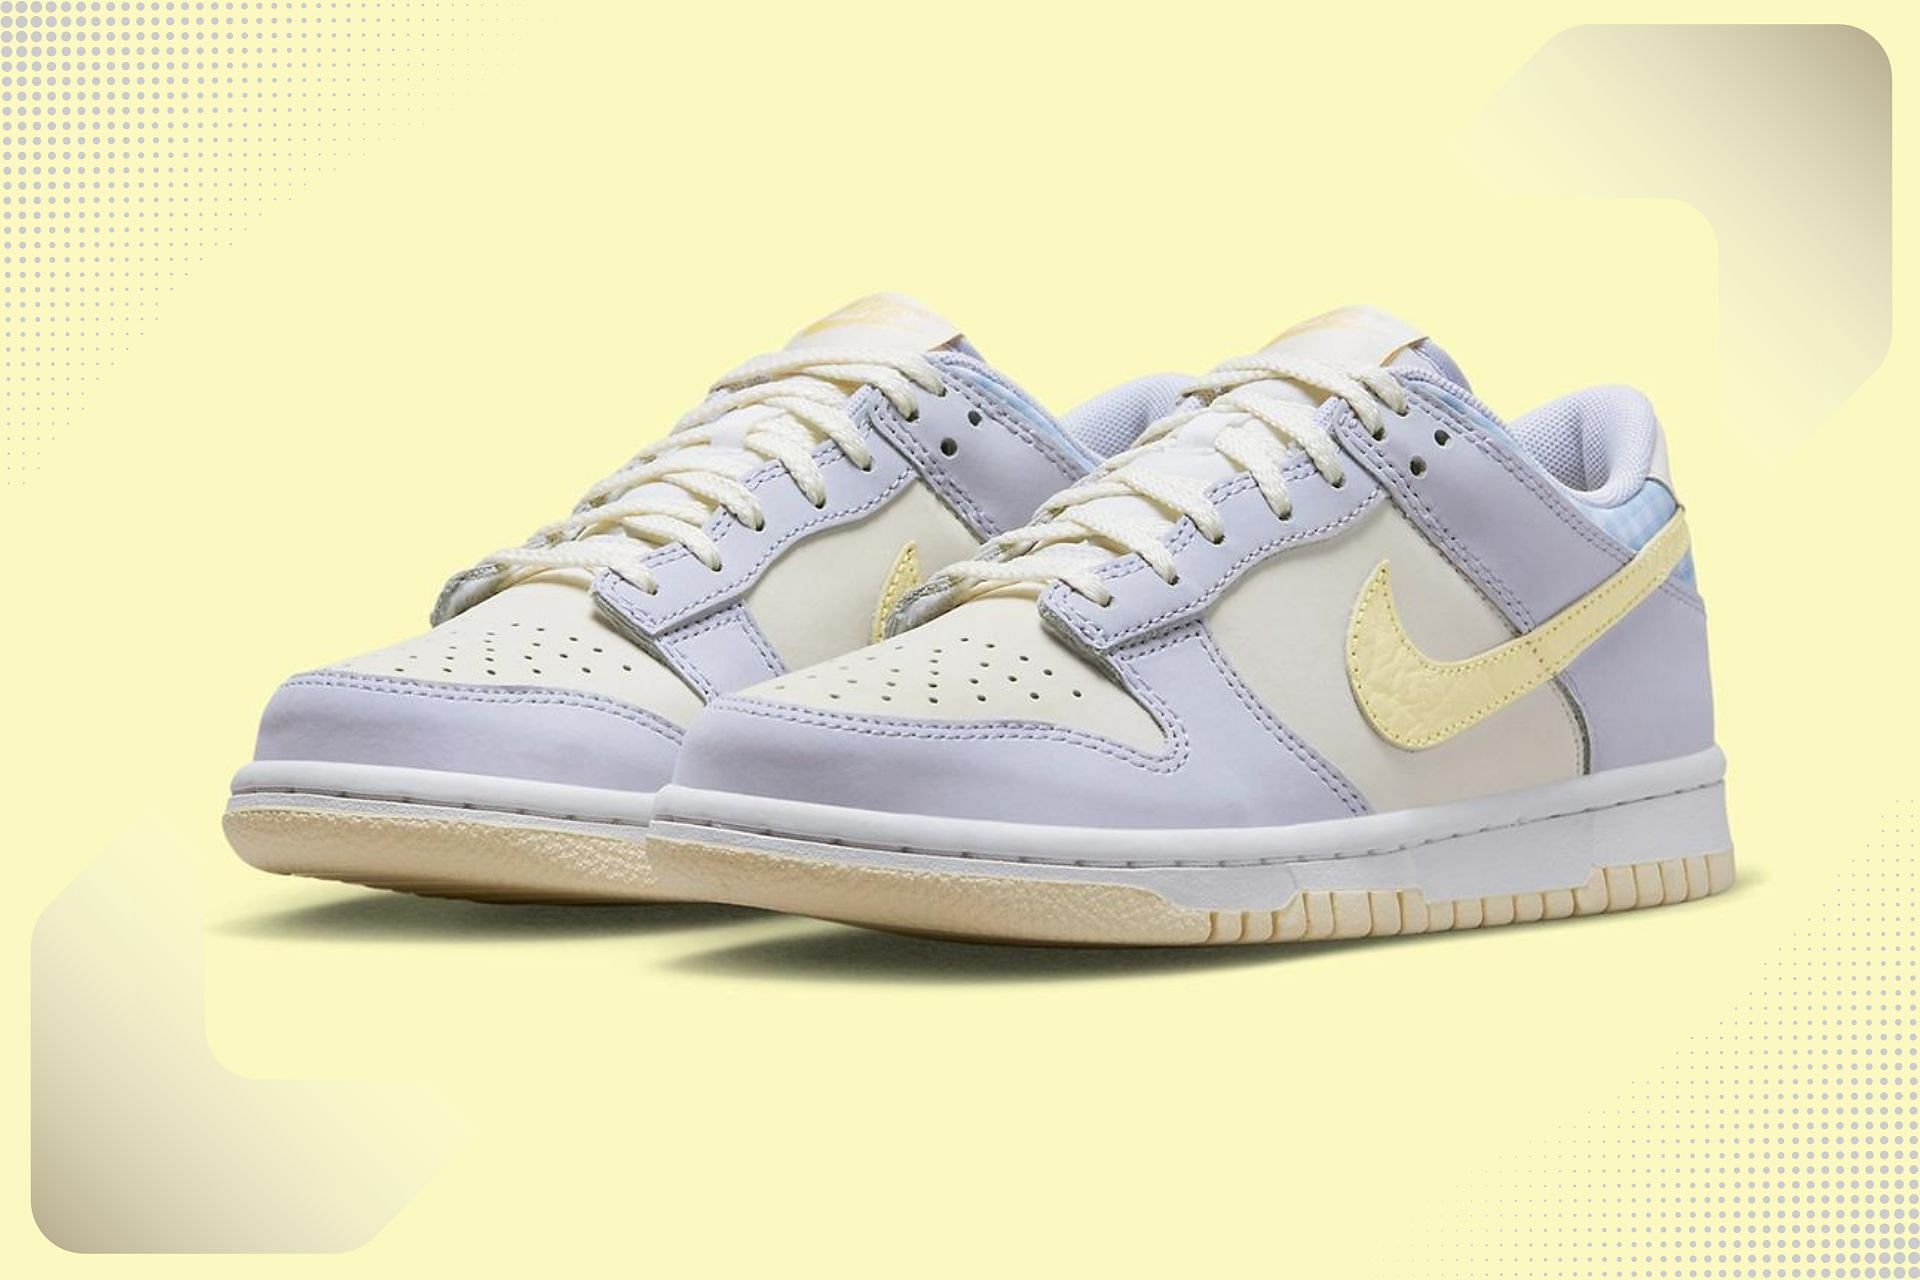 Haz todo con mi poder carbohidrato Mantenimiento Easter: Nike Dunk Low “Easter” shoes: Where to buy, price, and more details  explored